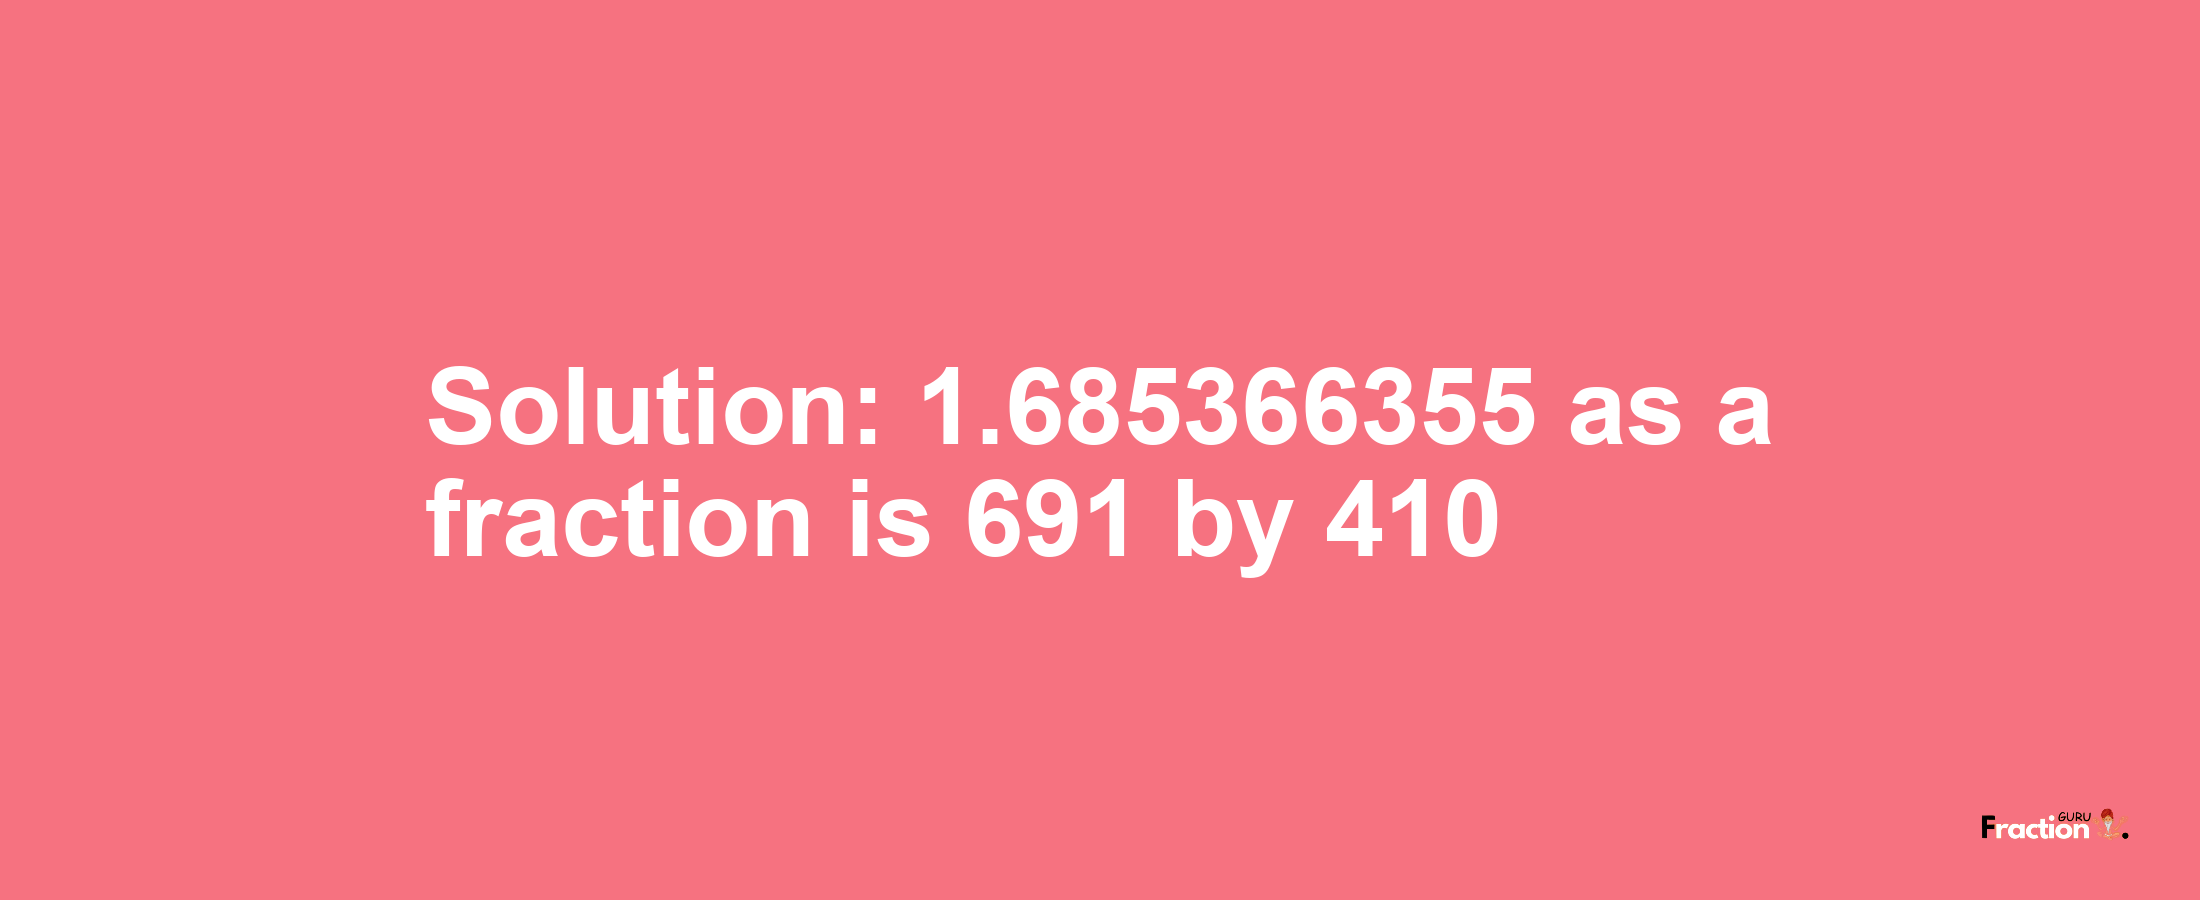 Solution:1.685366355 as a fraction is 691/410